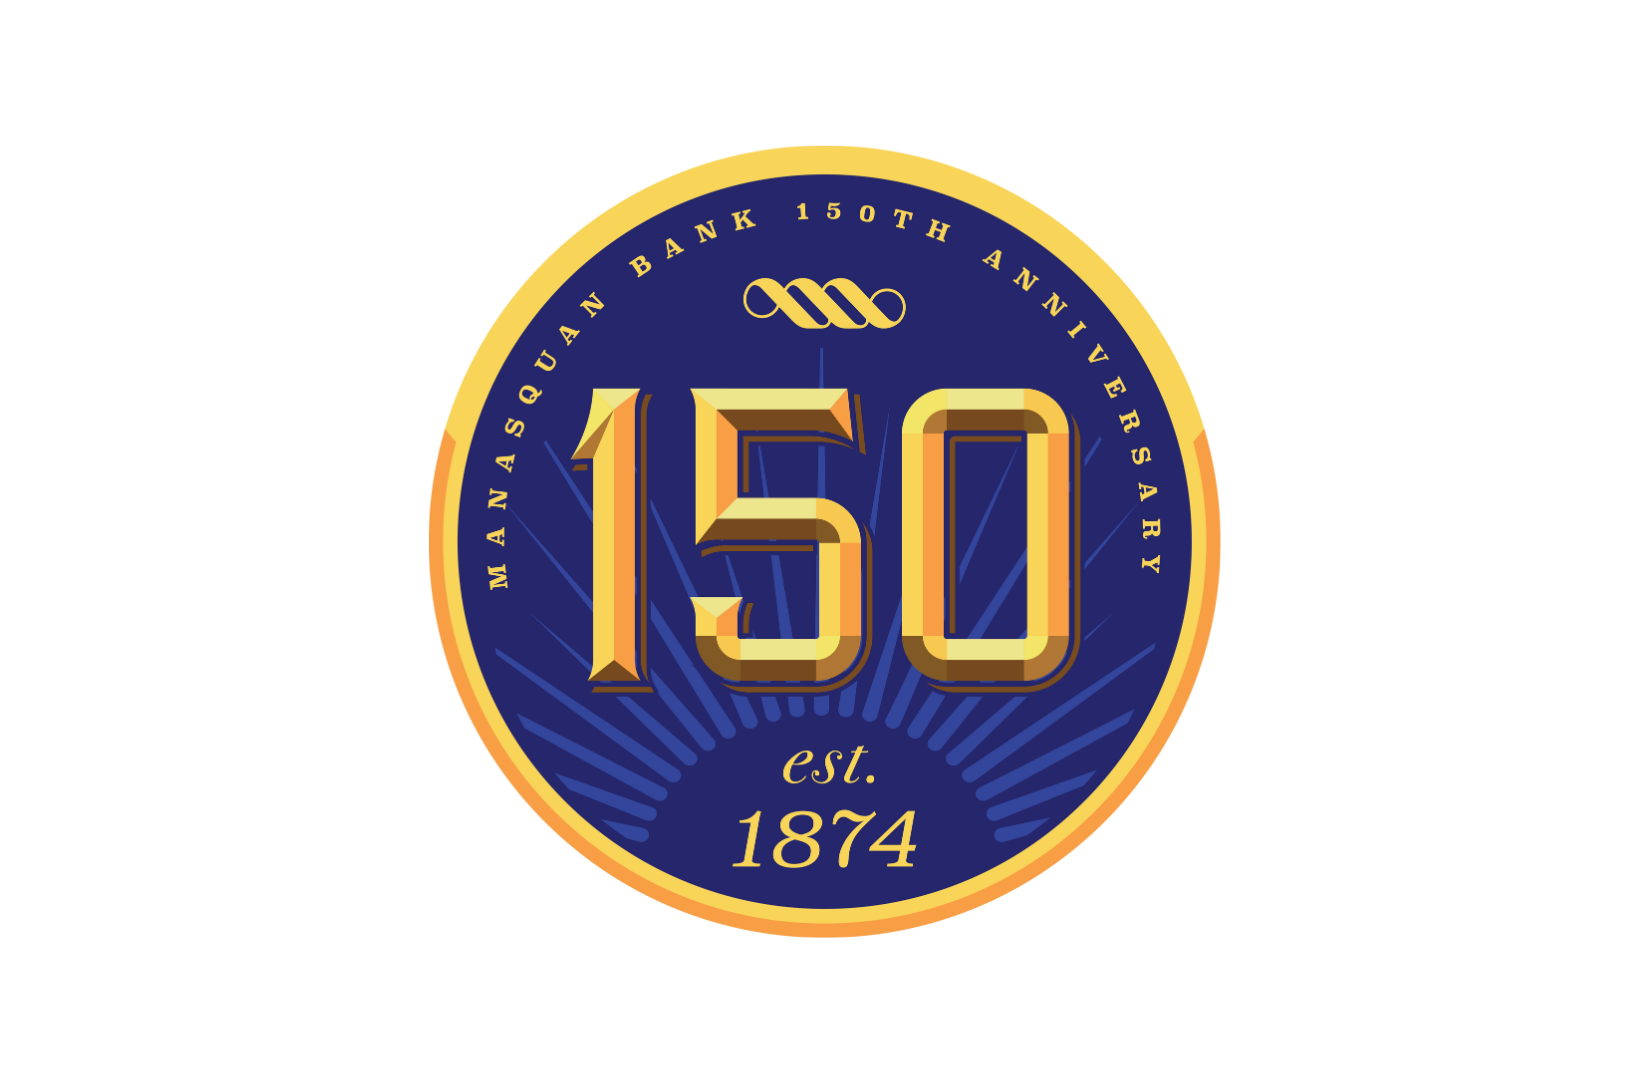 Cheers to 150 Years!